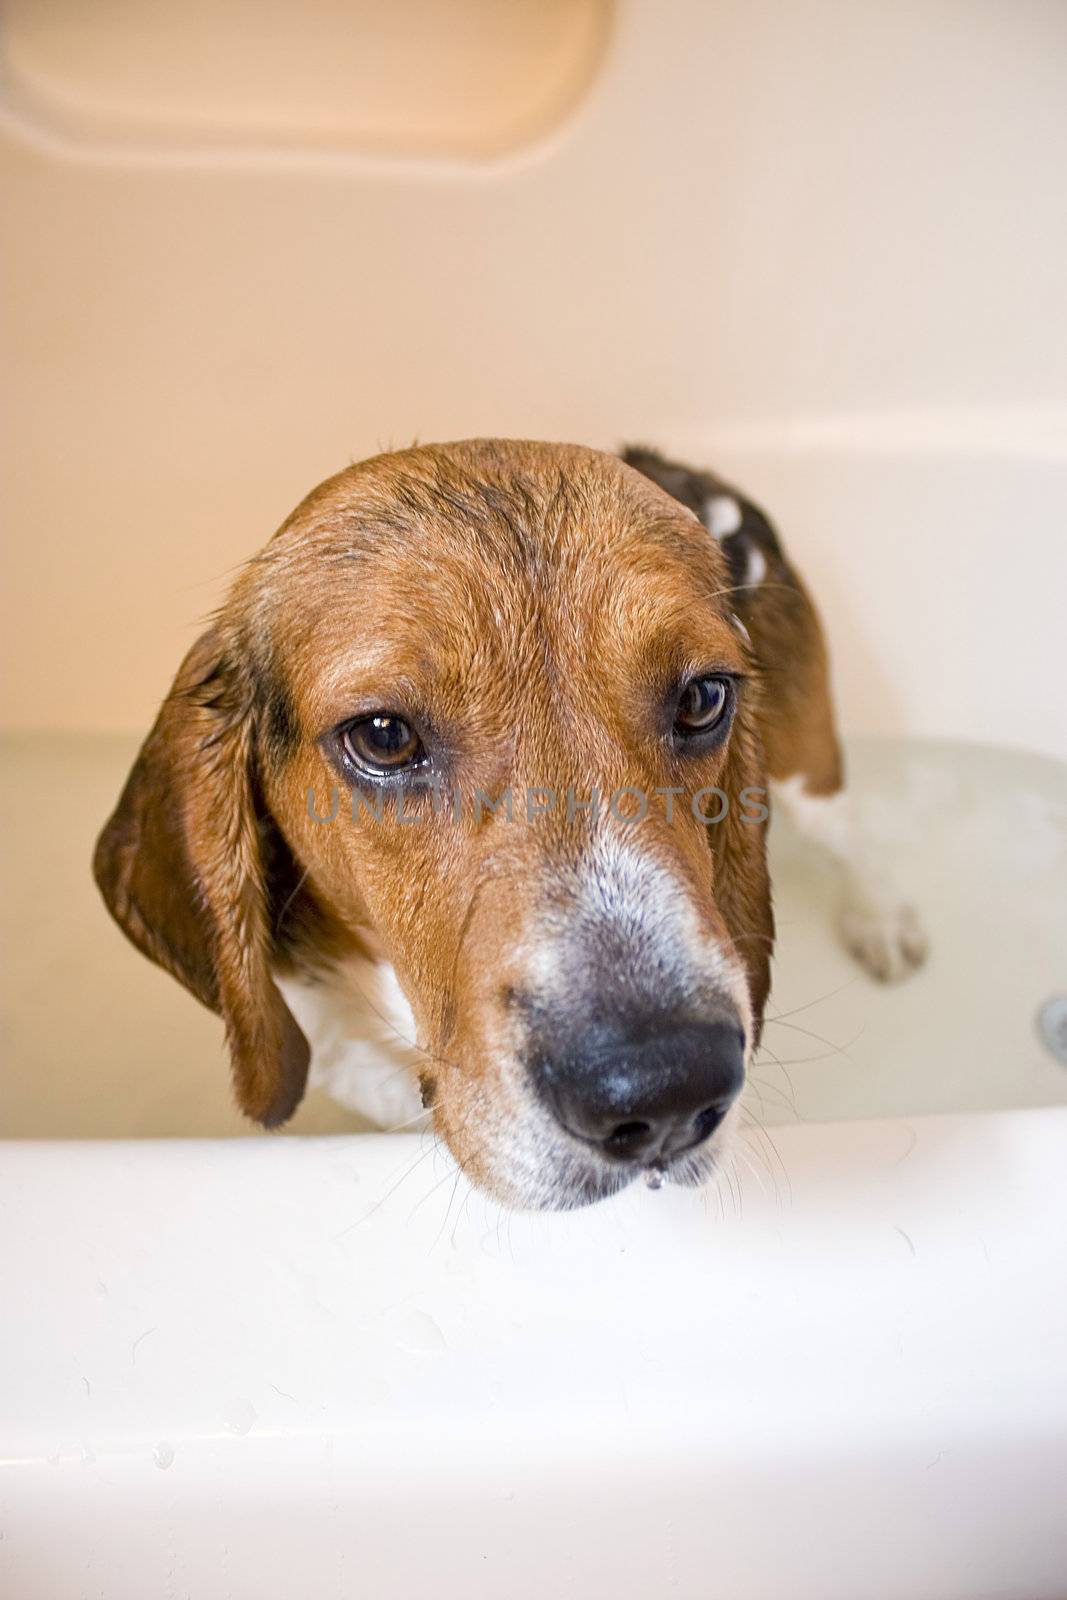 A beagle sitting in the bath tub.  He doesn't seem to be having a great time.